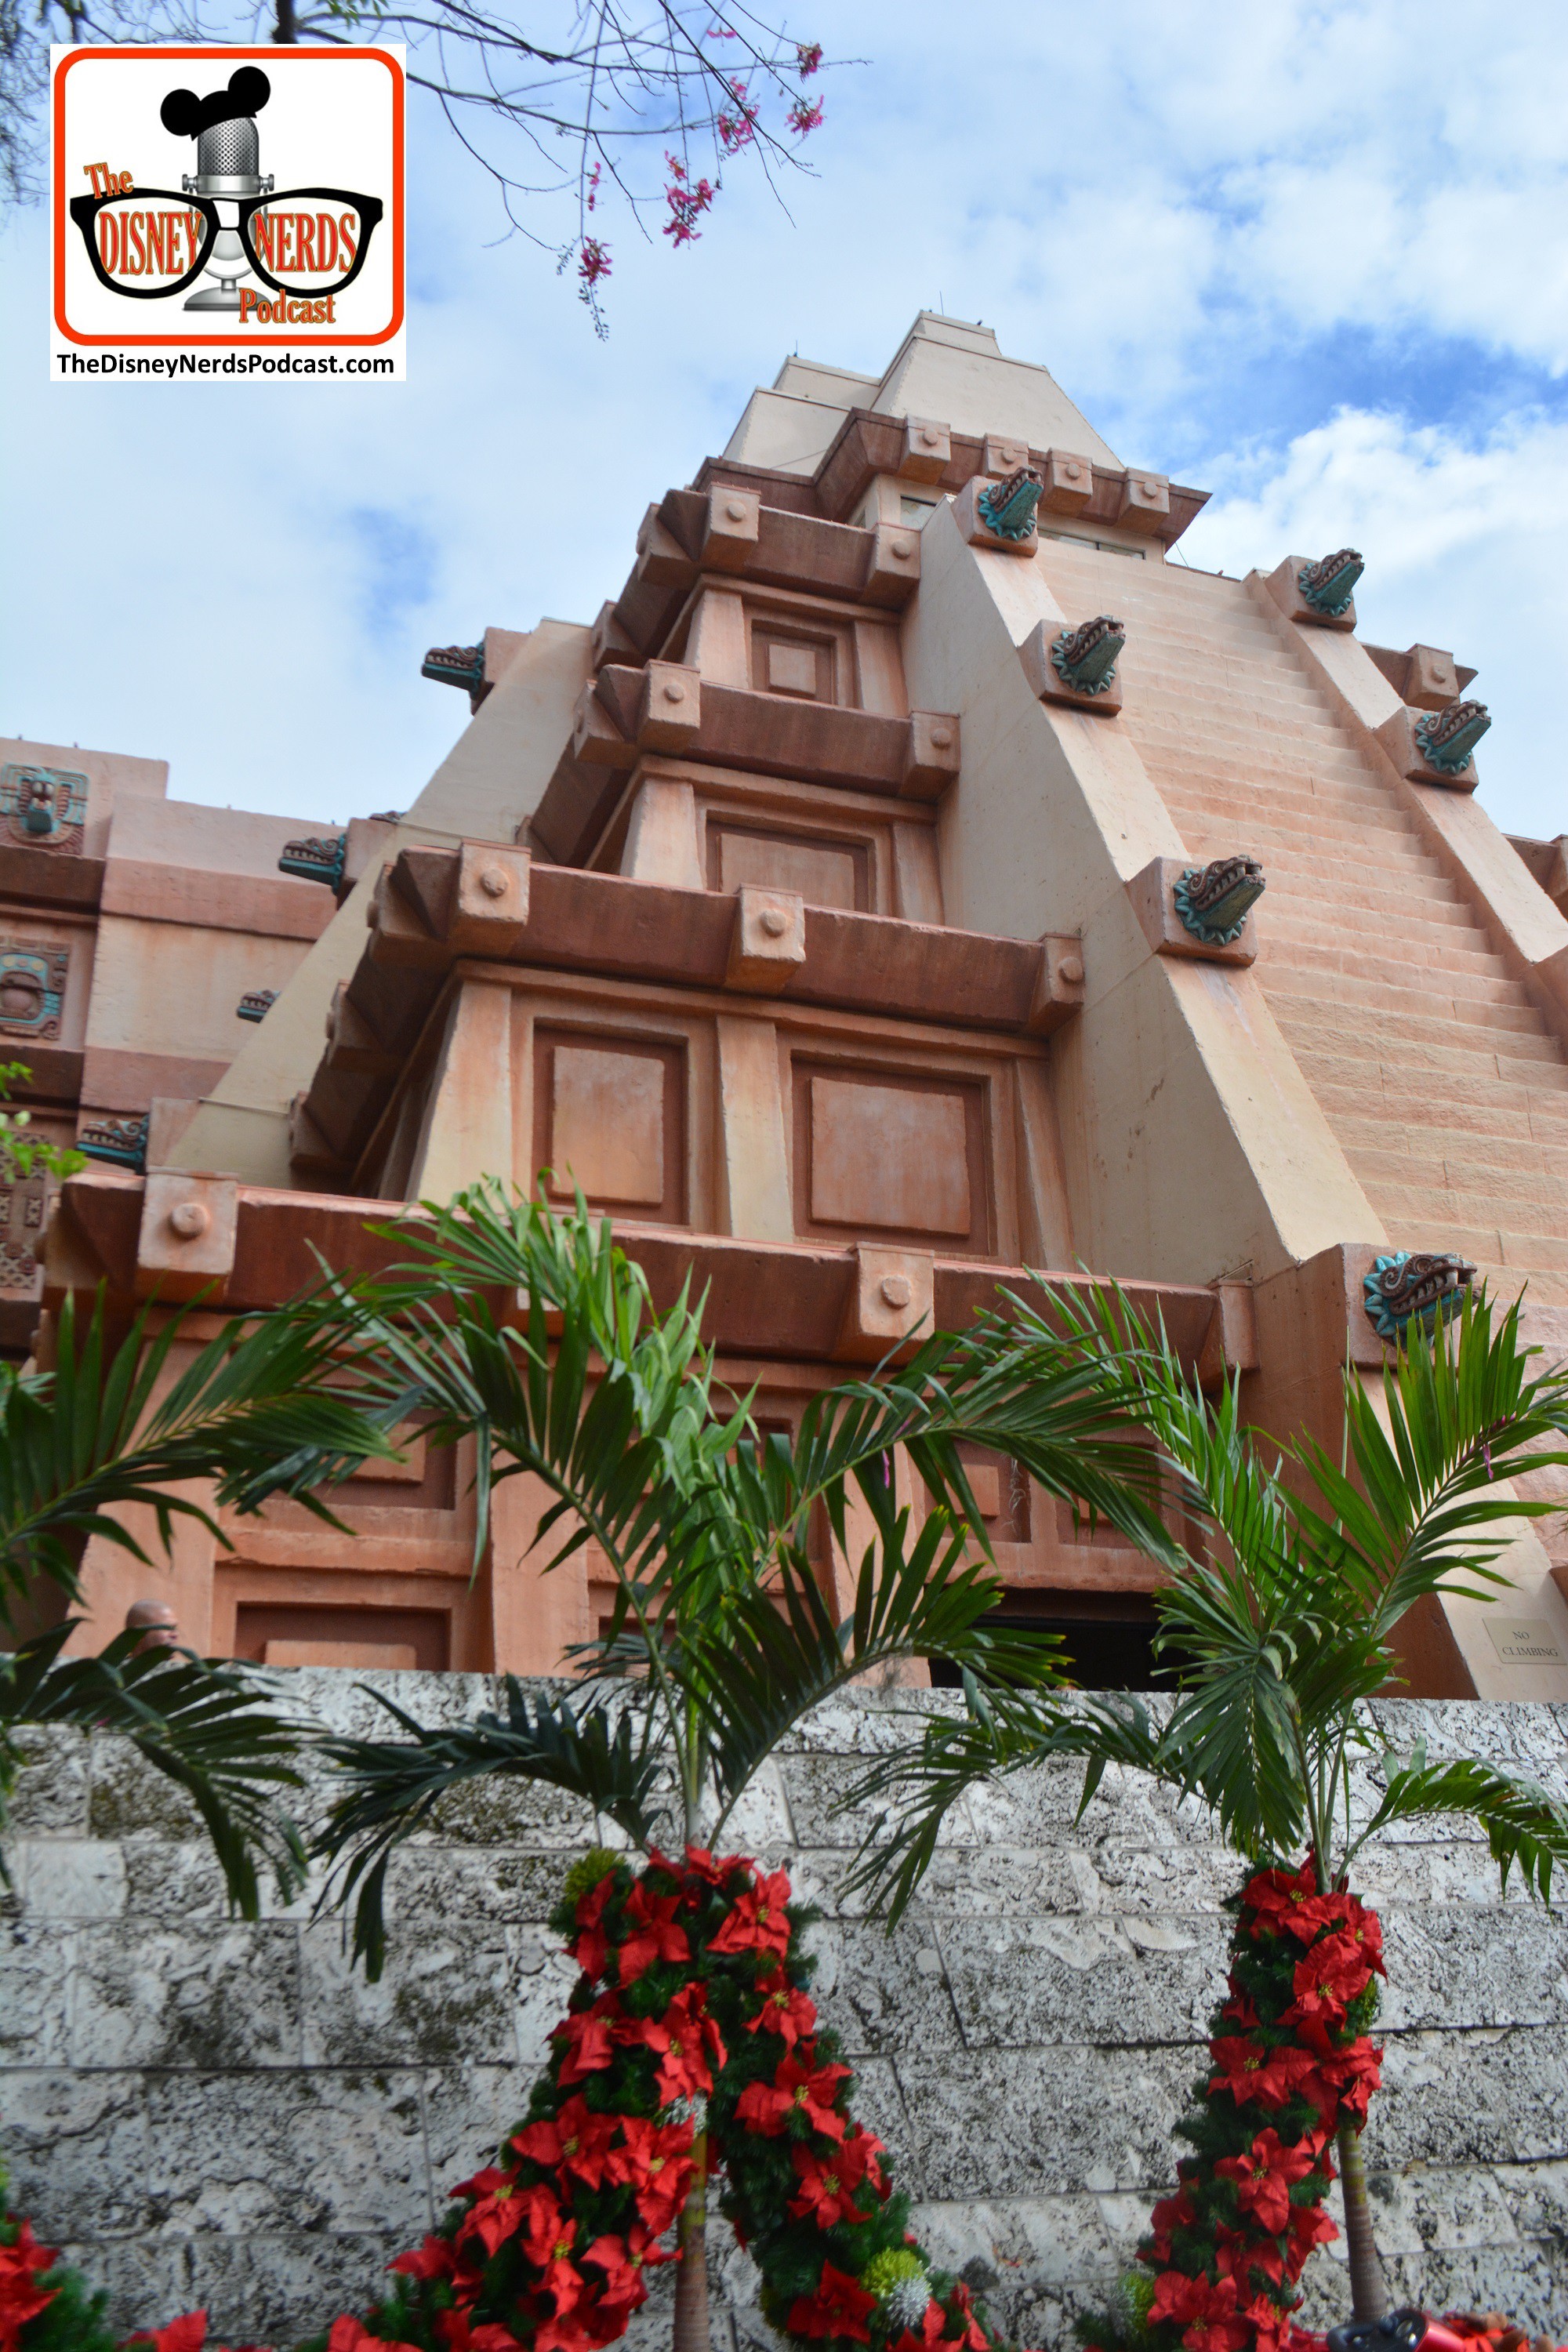 2015-12 - Epcot - Holidays Around the World in Mexico is ready for the holidays (along with a new "No Climbing" sign)